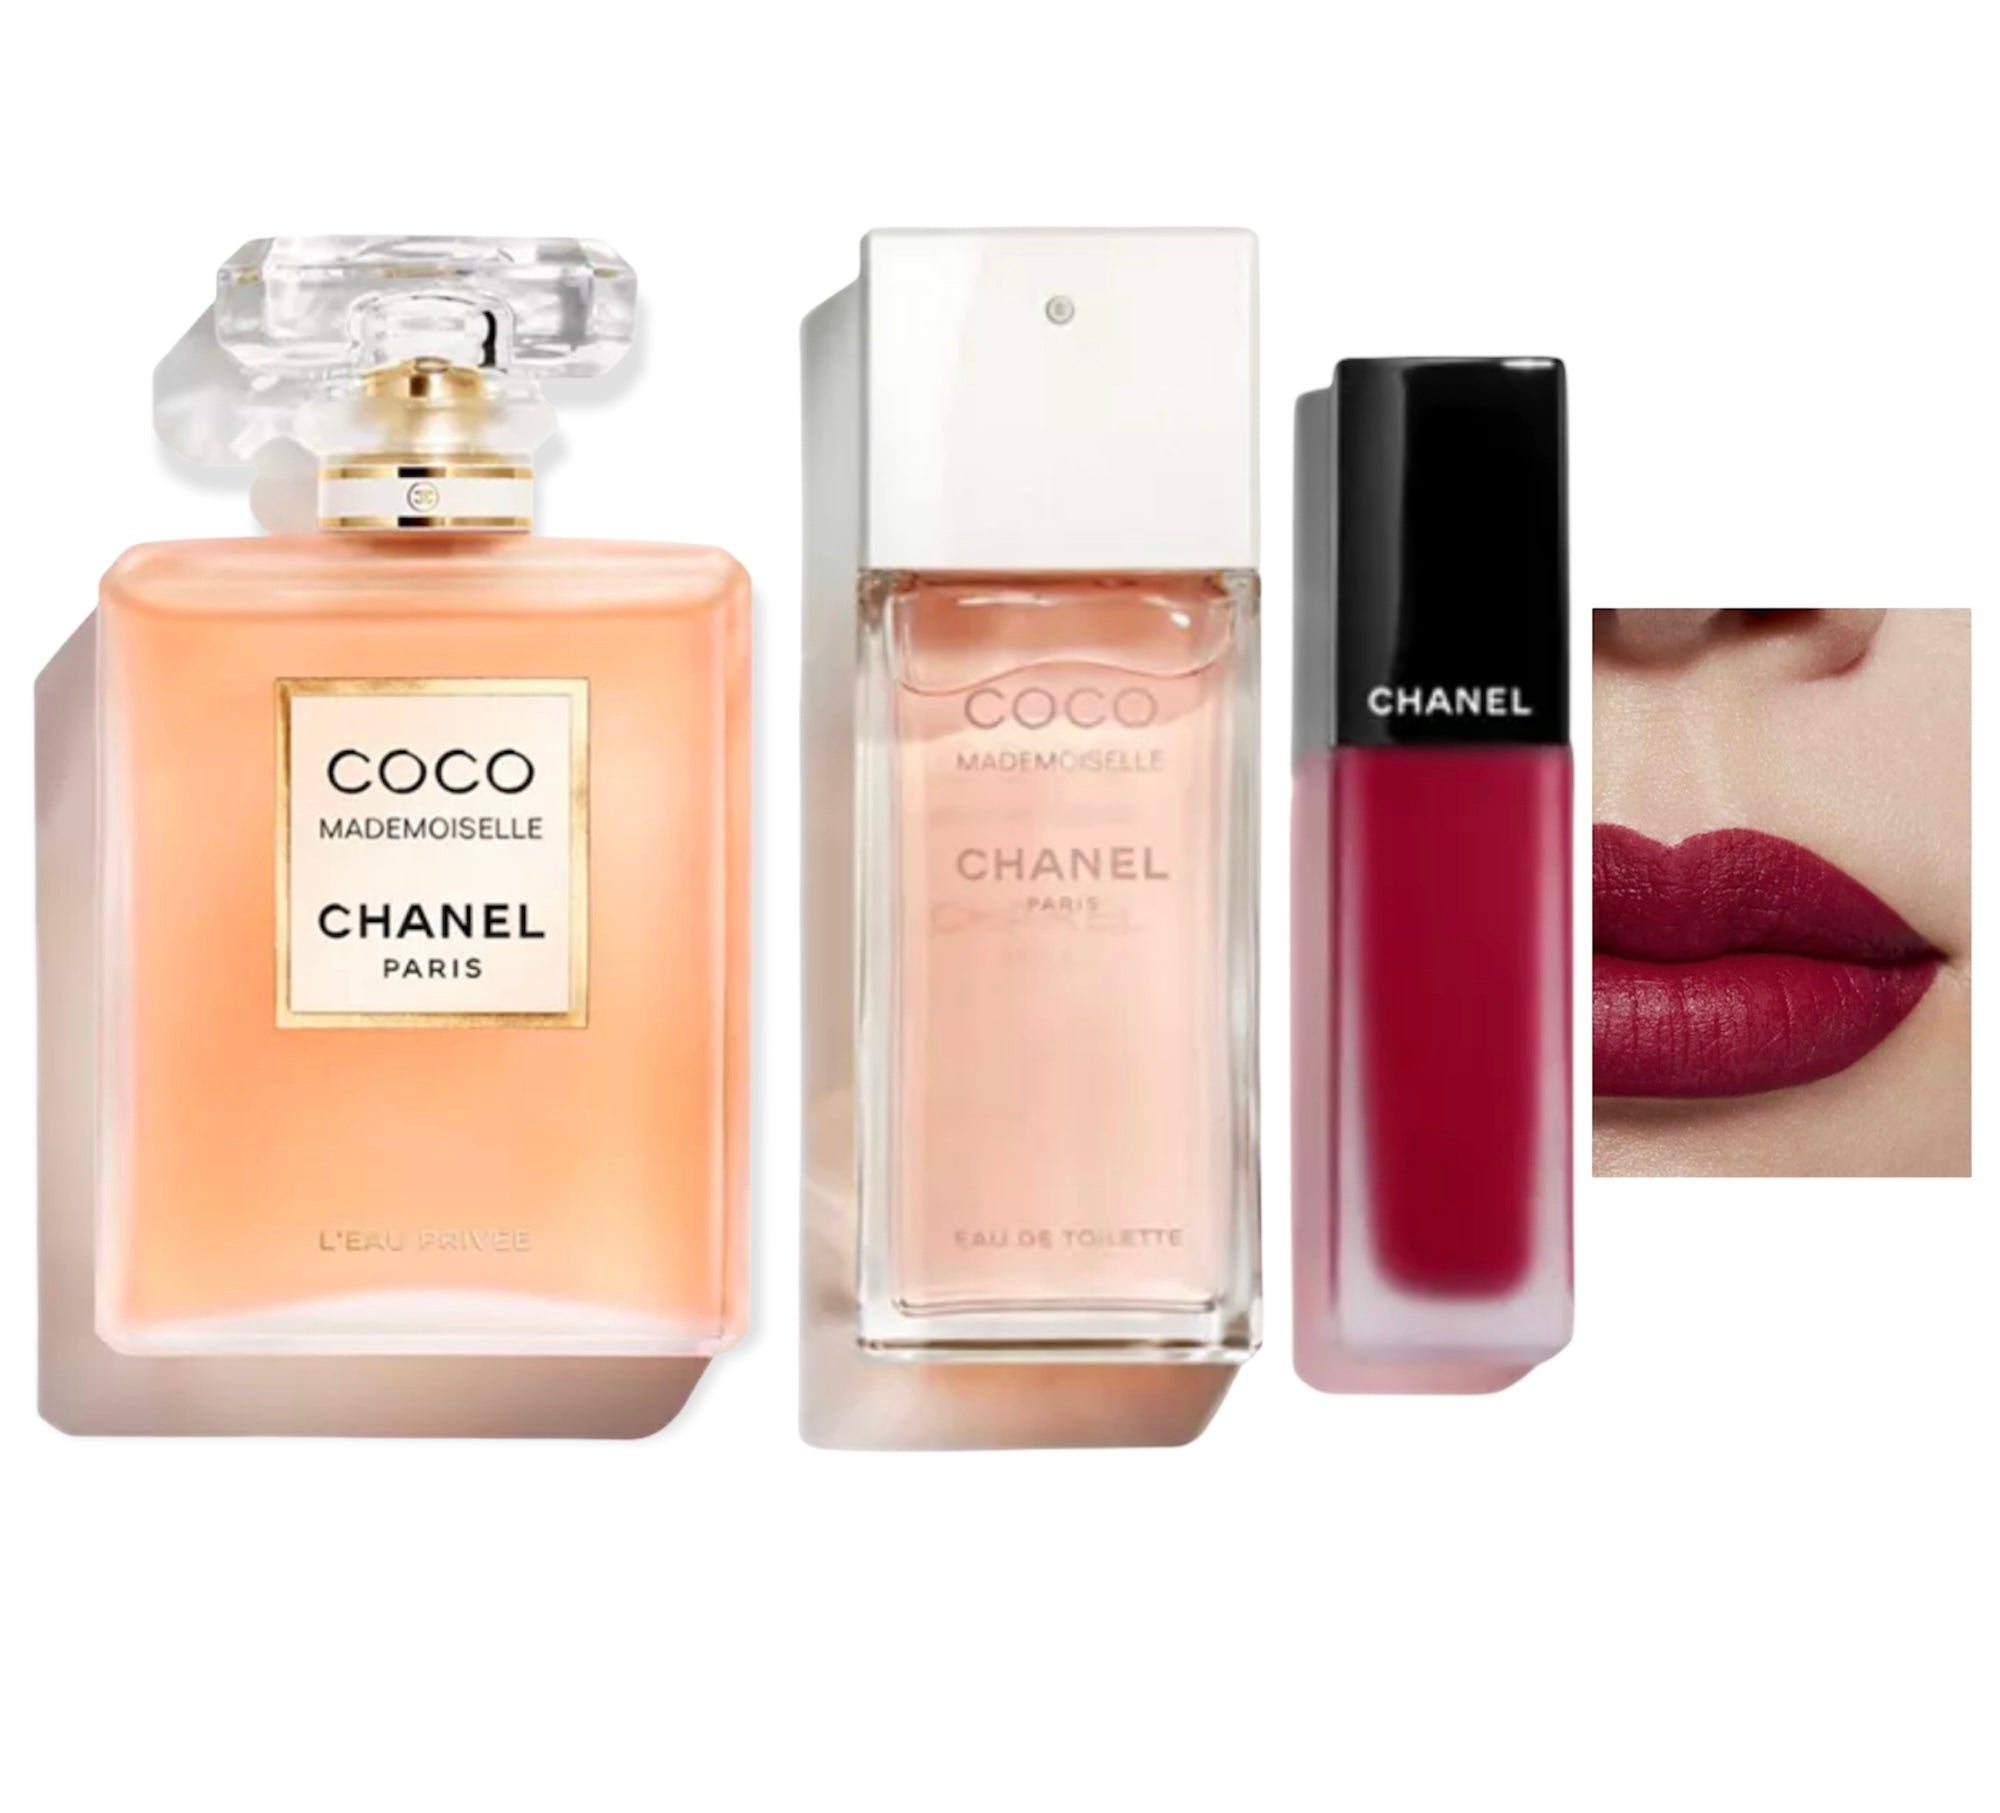 coco mademoiselle chanel perfume for man